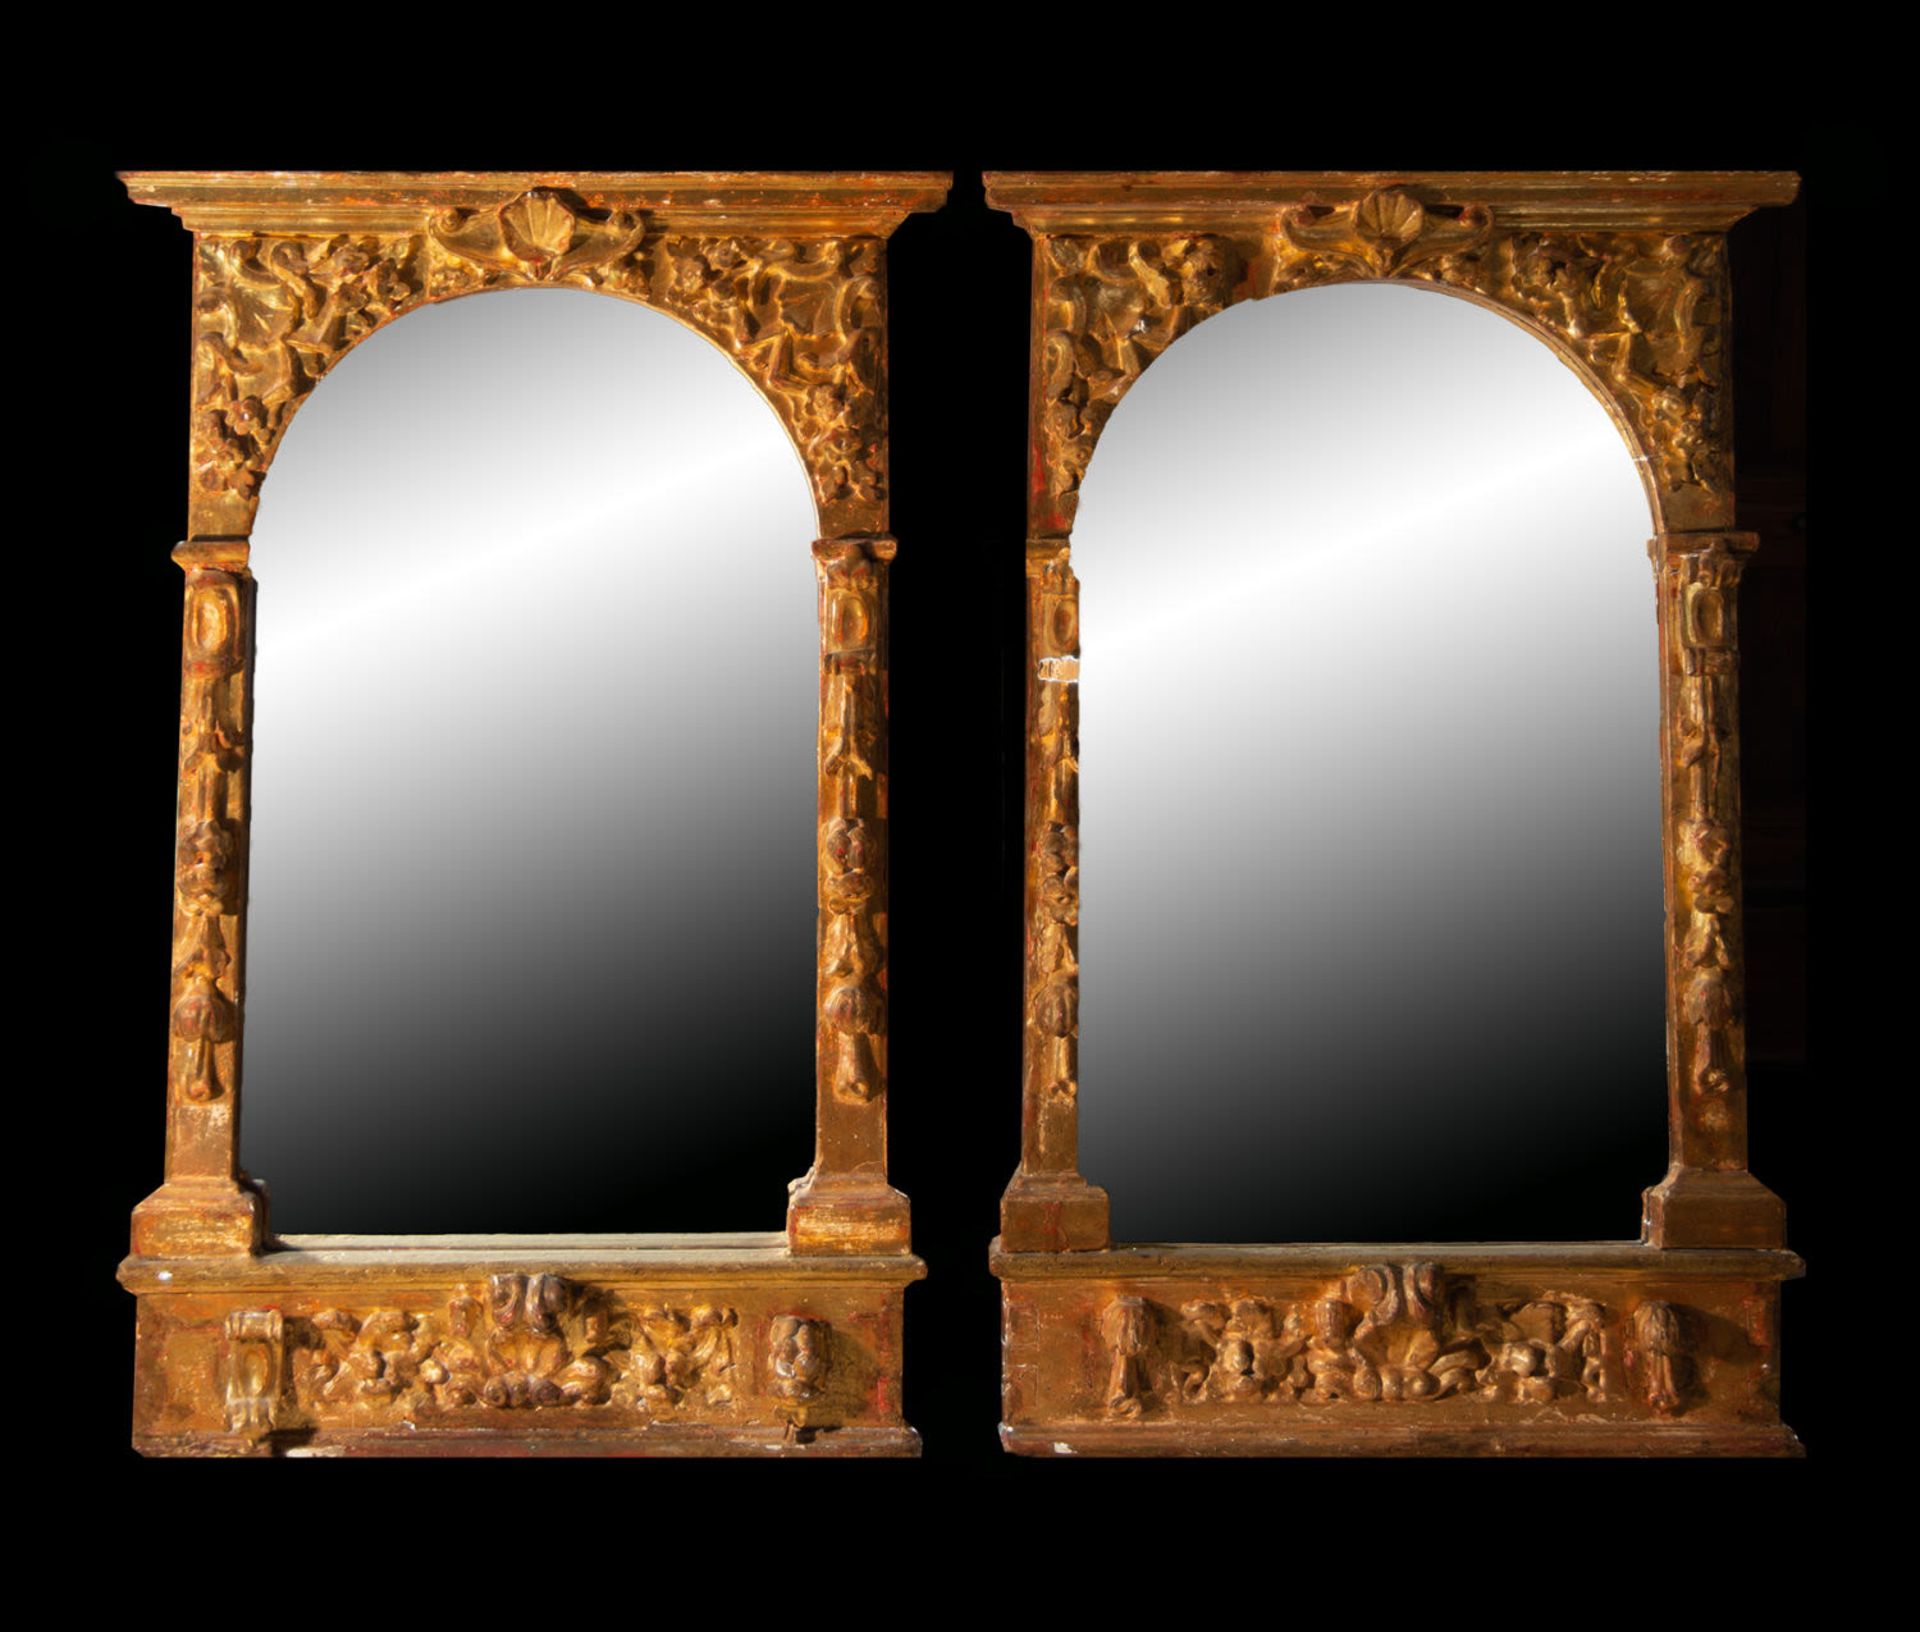 Pair of Baroque tabernacle frames, late 17th century, mirror mounted